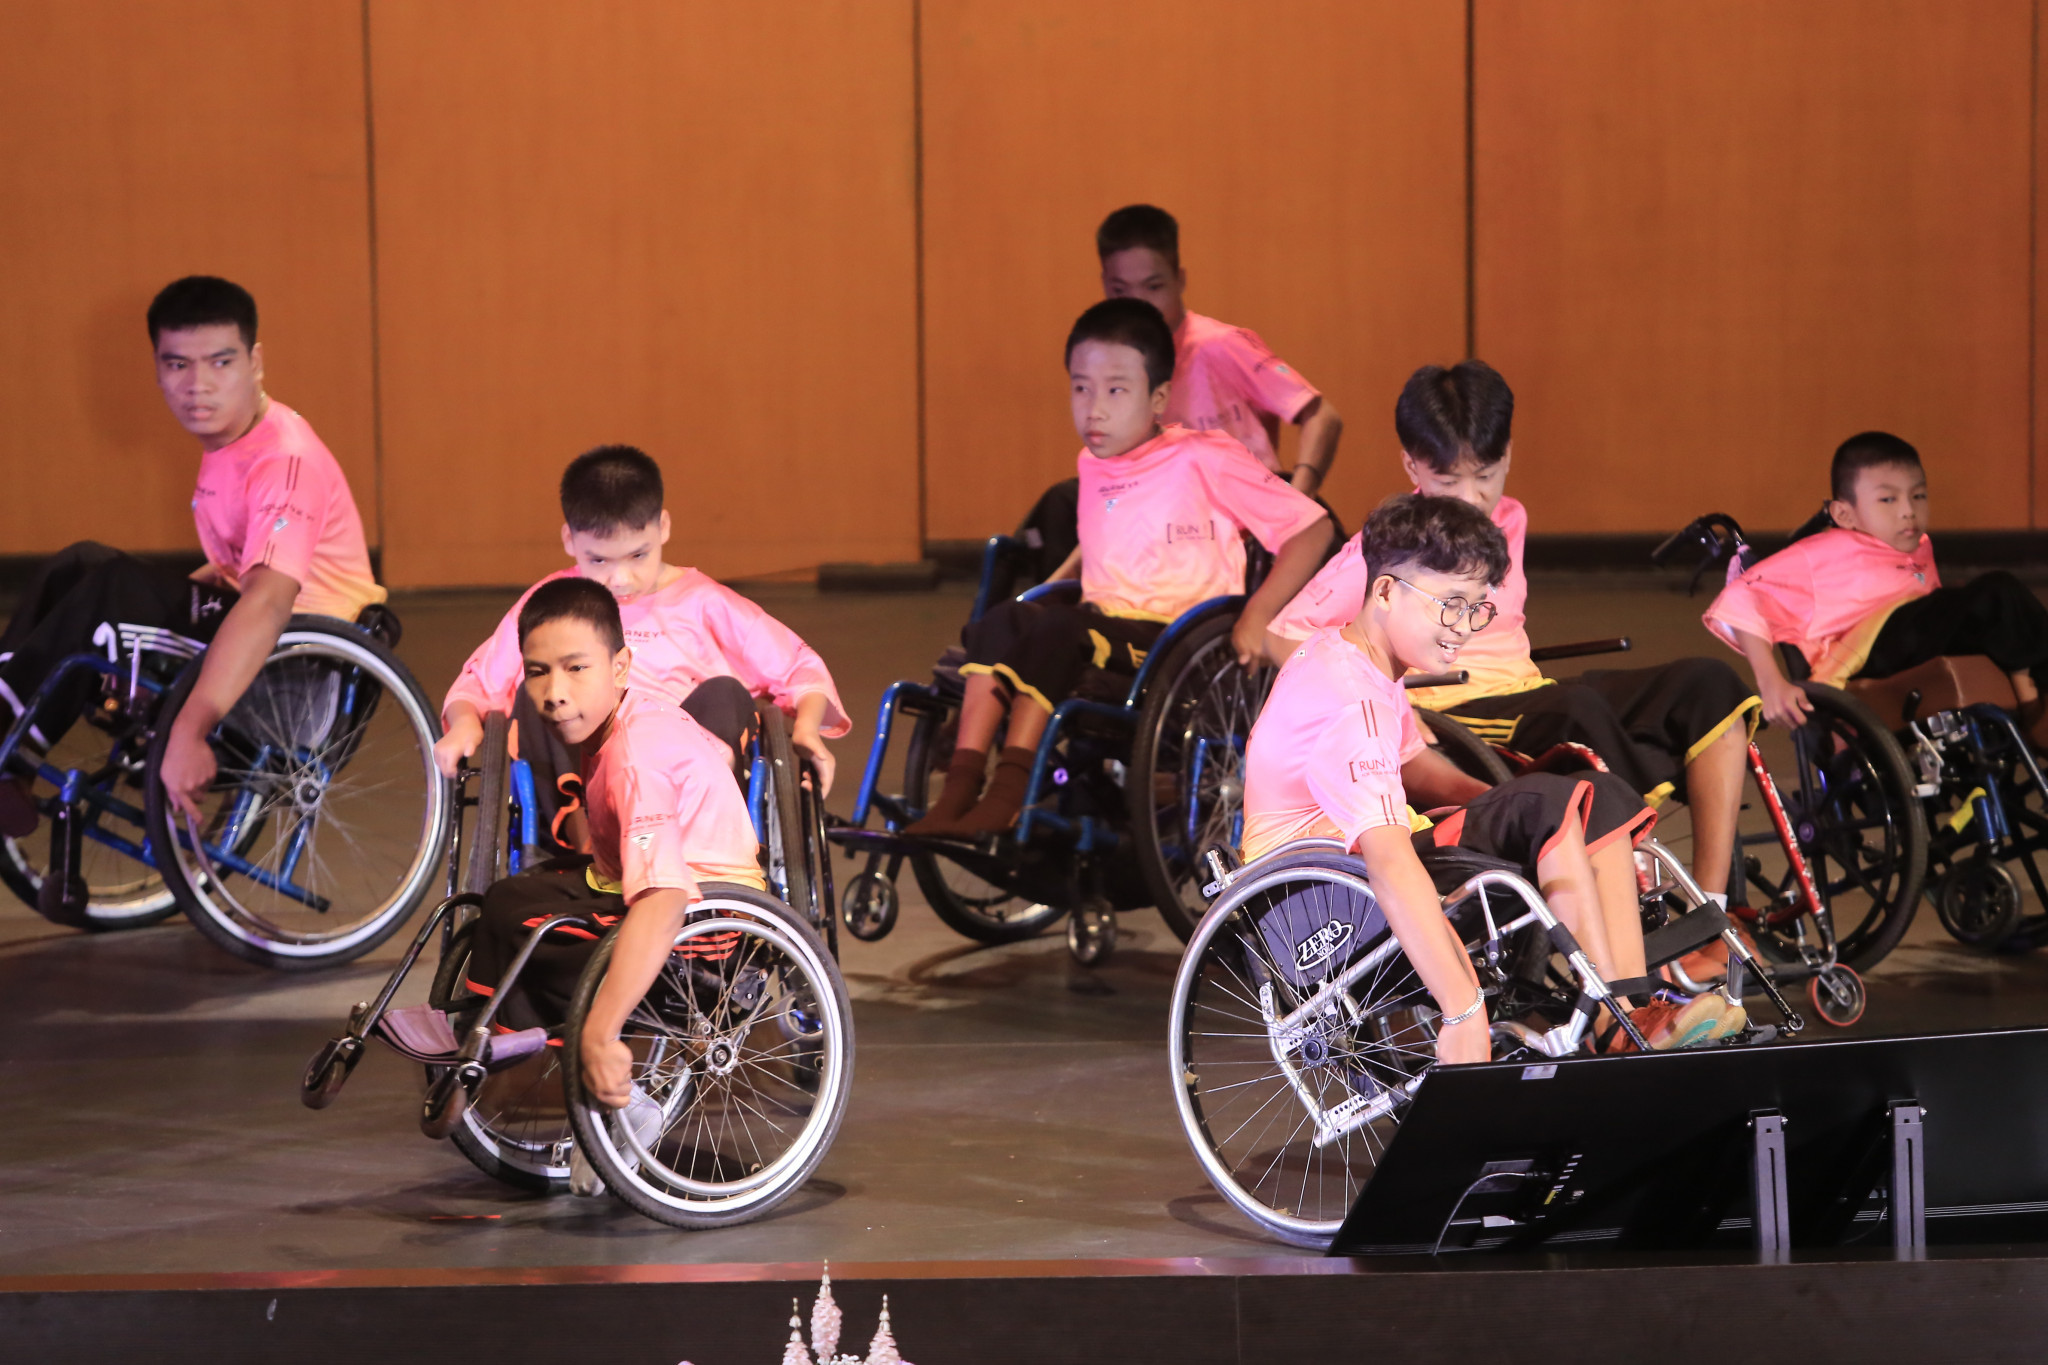 Wheelchair athletes performed an inspiring dance routine to start day three of the UTS World Youth Festival ©UTS